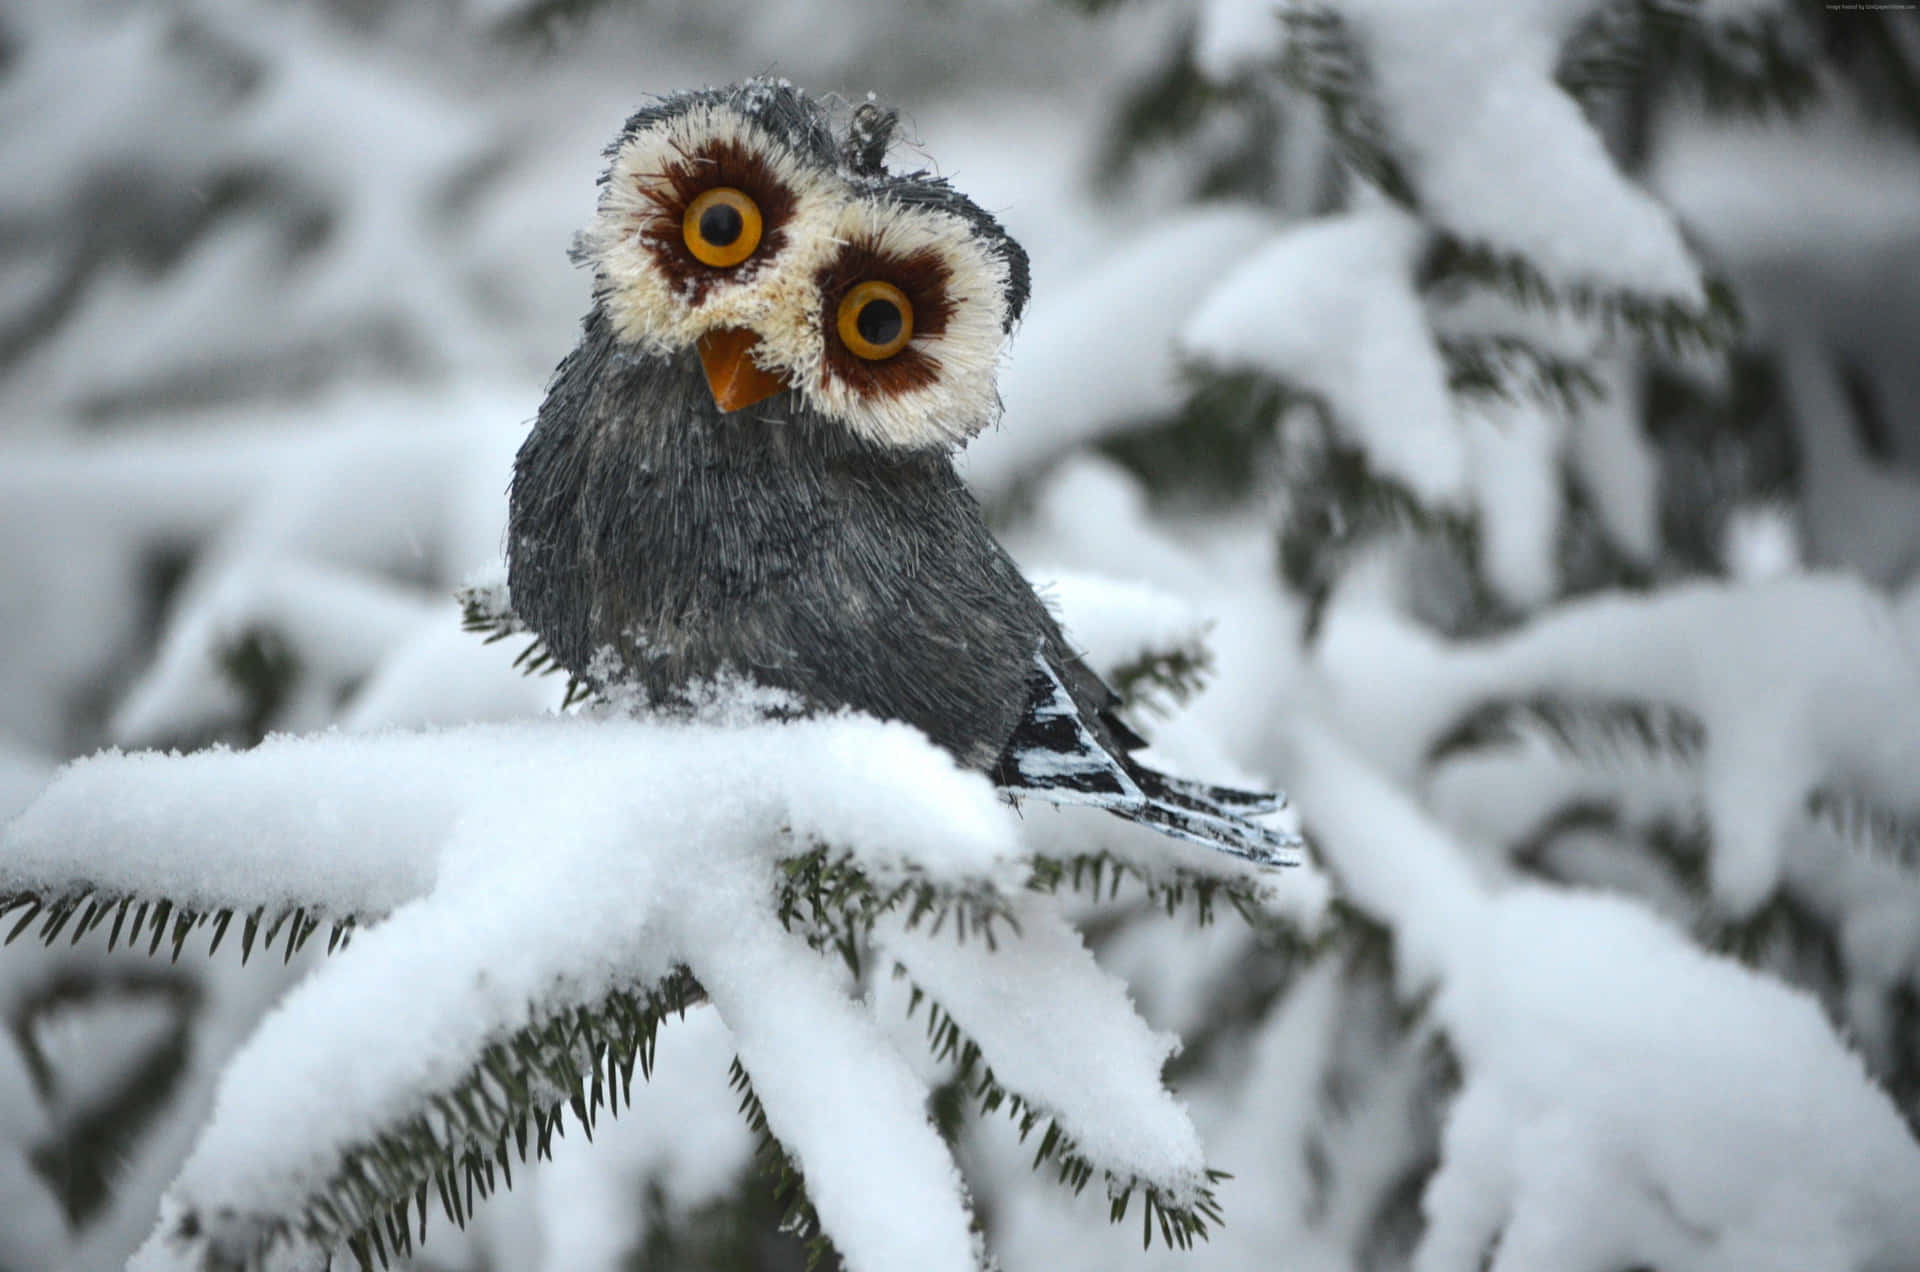 Majestic Snow Bird Perched on a Winter Branch Wallpaper